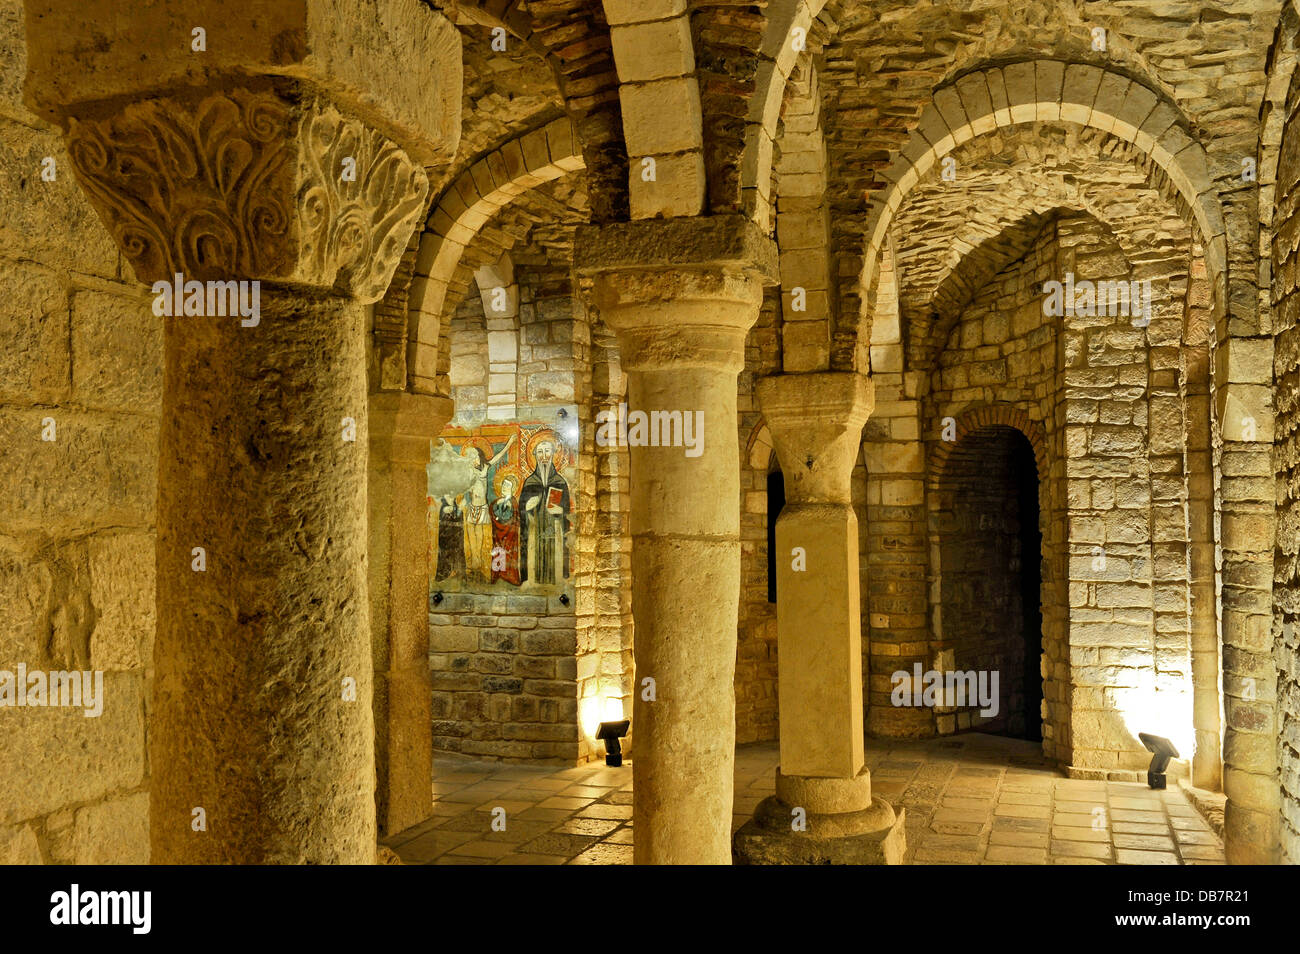 Columns, arches, Byzantine-style frescoes, Crypt San Casto, 4th century, Cathedral of Trivento Stock Photo